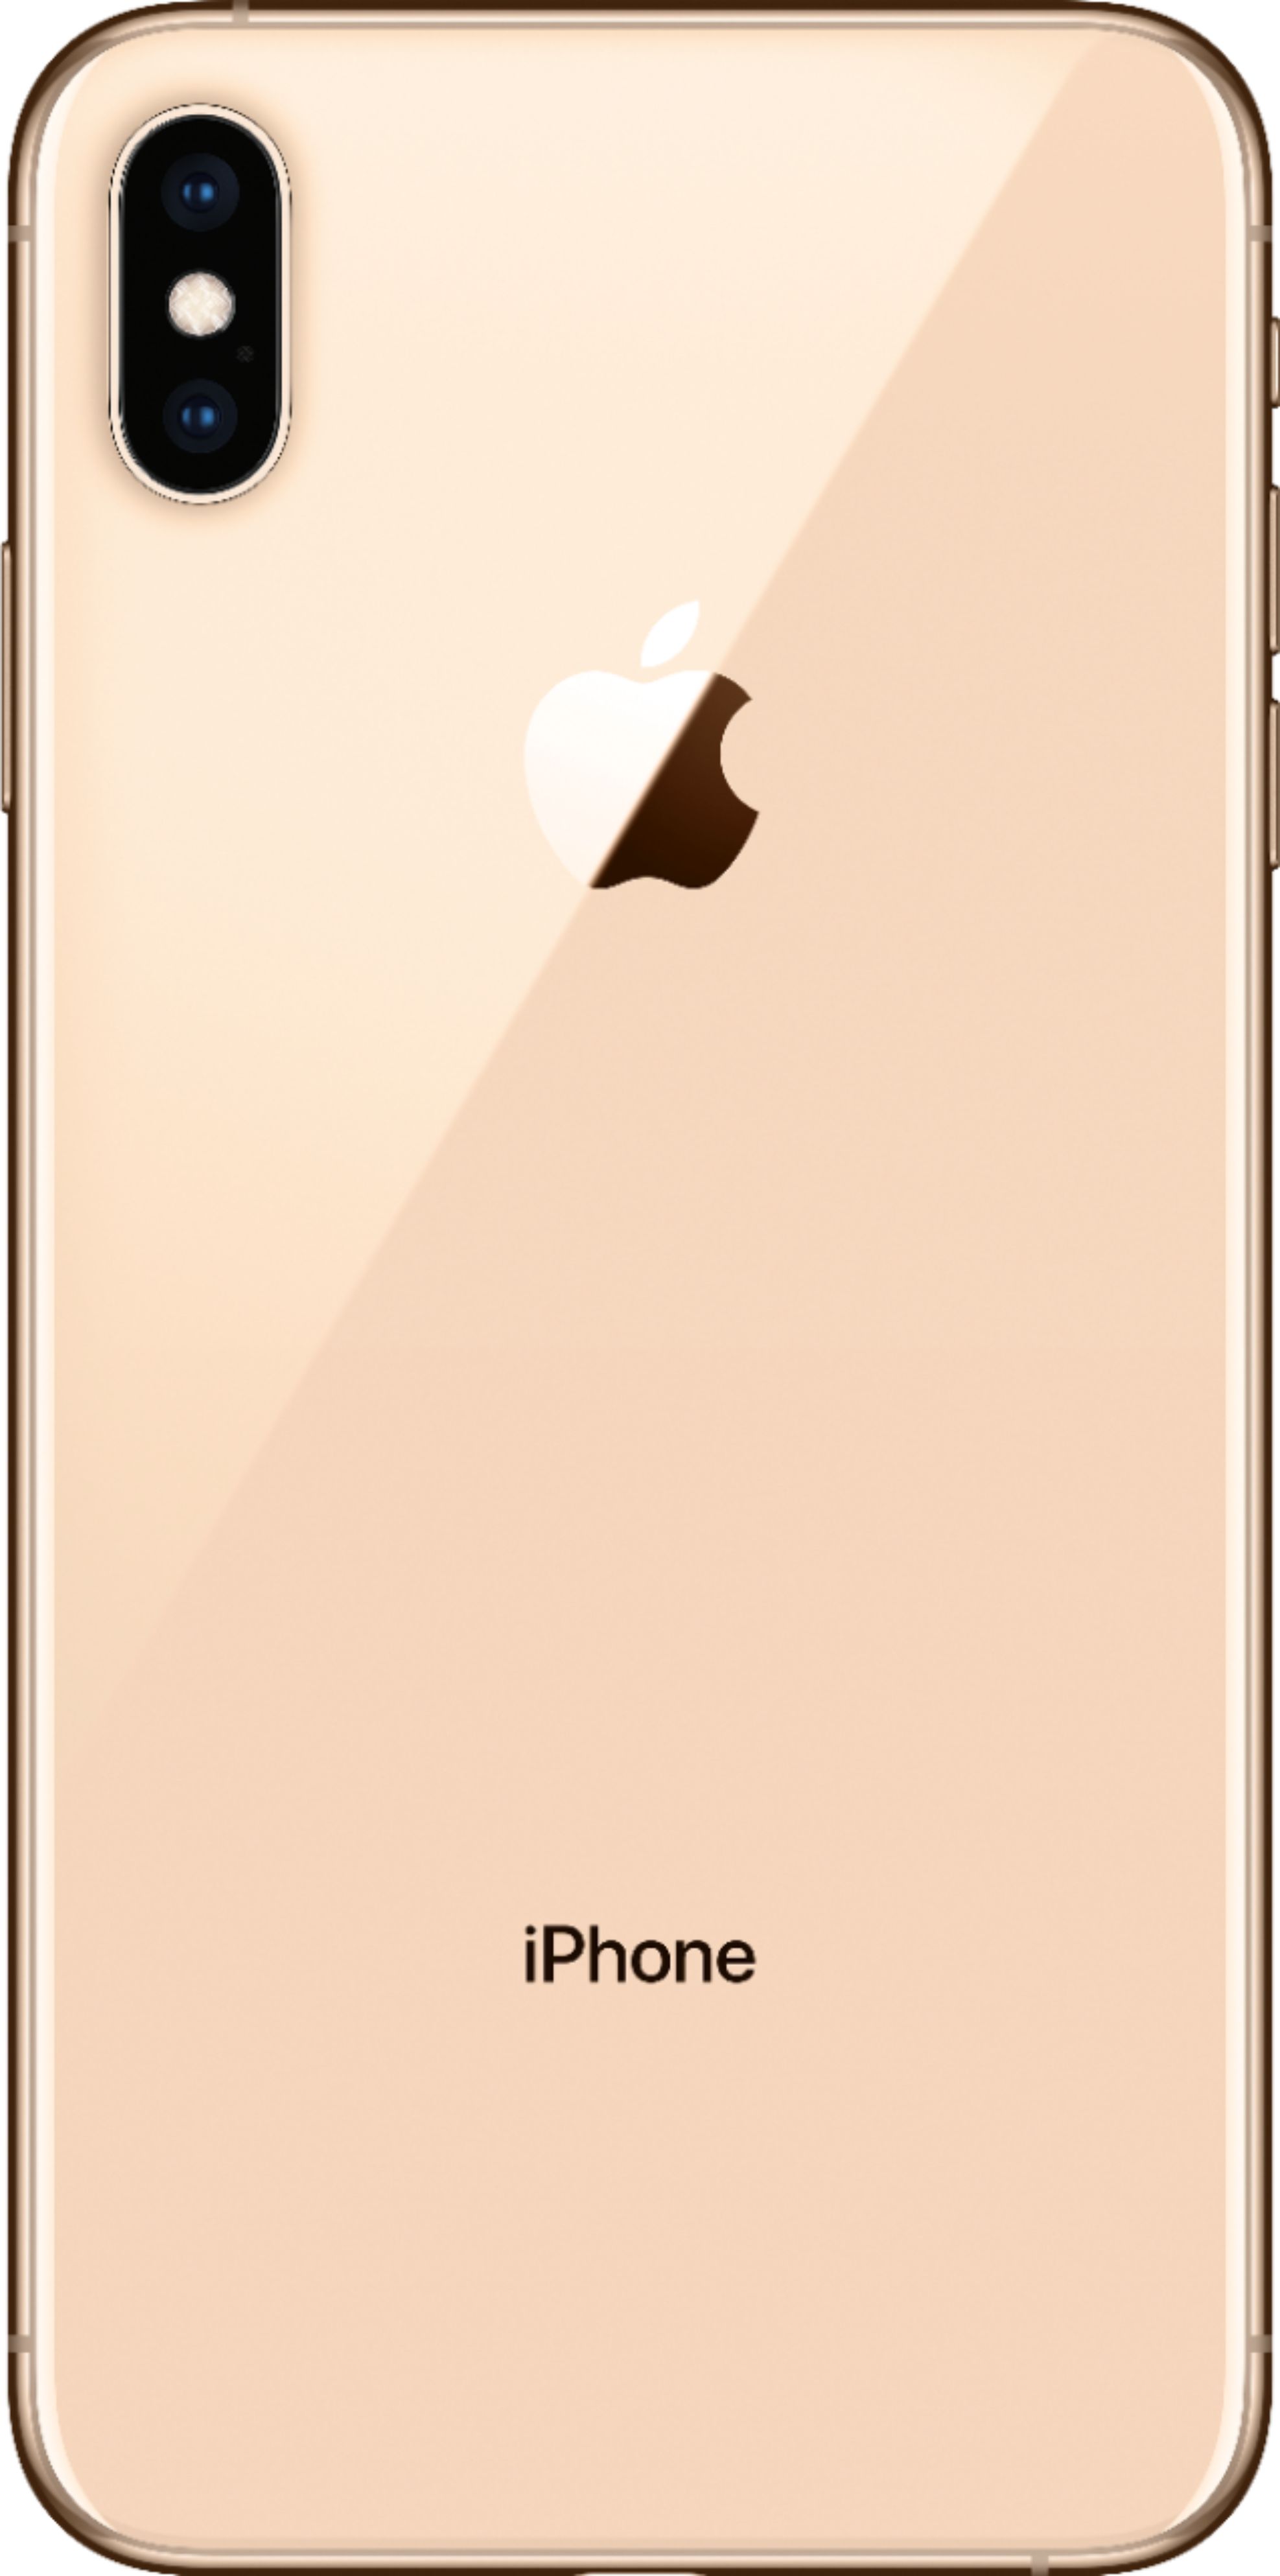 Restored Apple iPhone XS Max 512GB Factory GSM Unlocked T-Mobile AT&T 4G LTE - Gold (Refurbished) - image 2 of 2